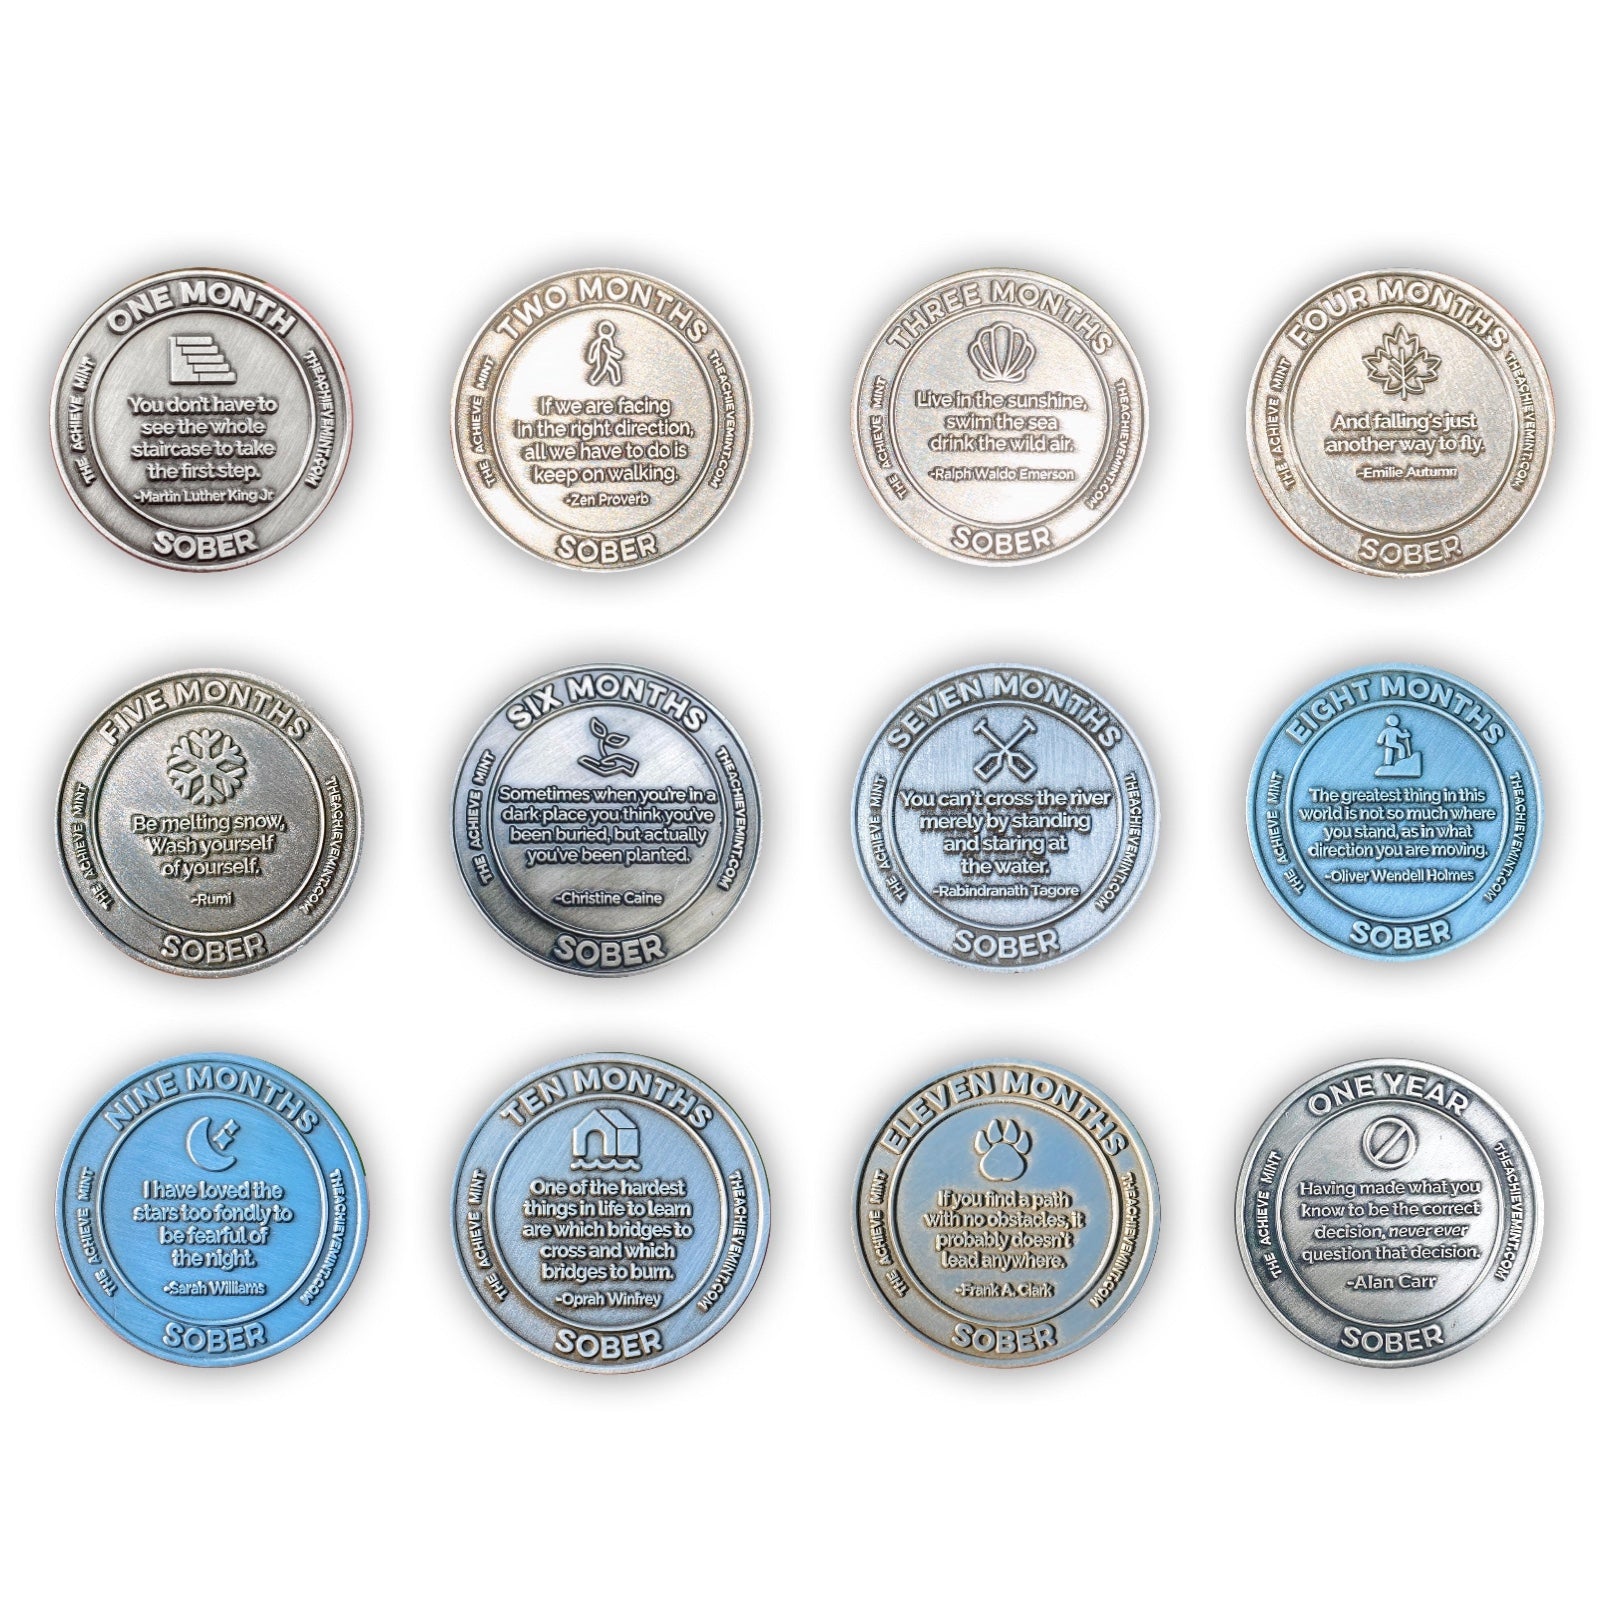 First Year Sober Complete Set: 12 coins total - The Achieve Mint